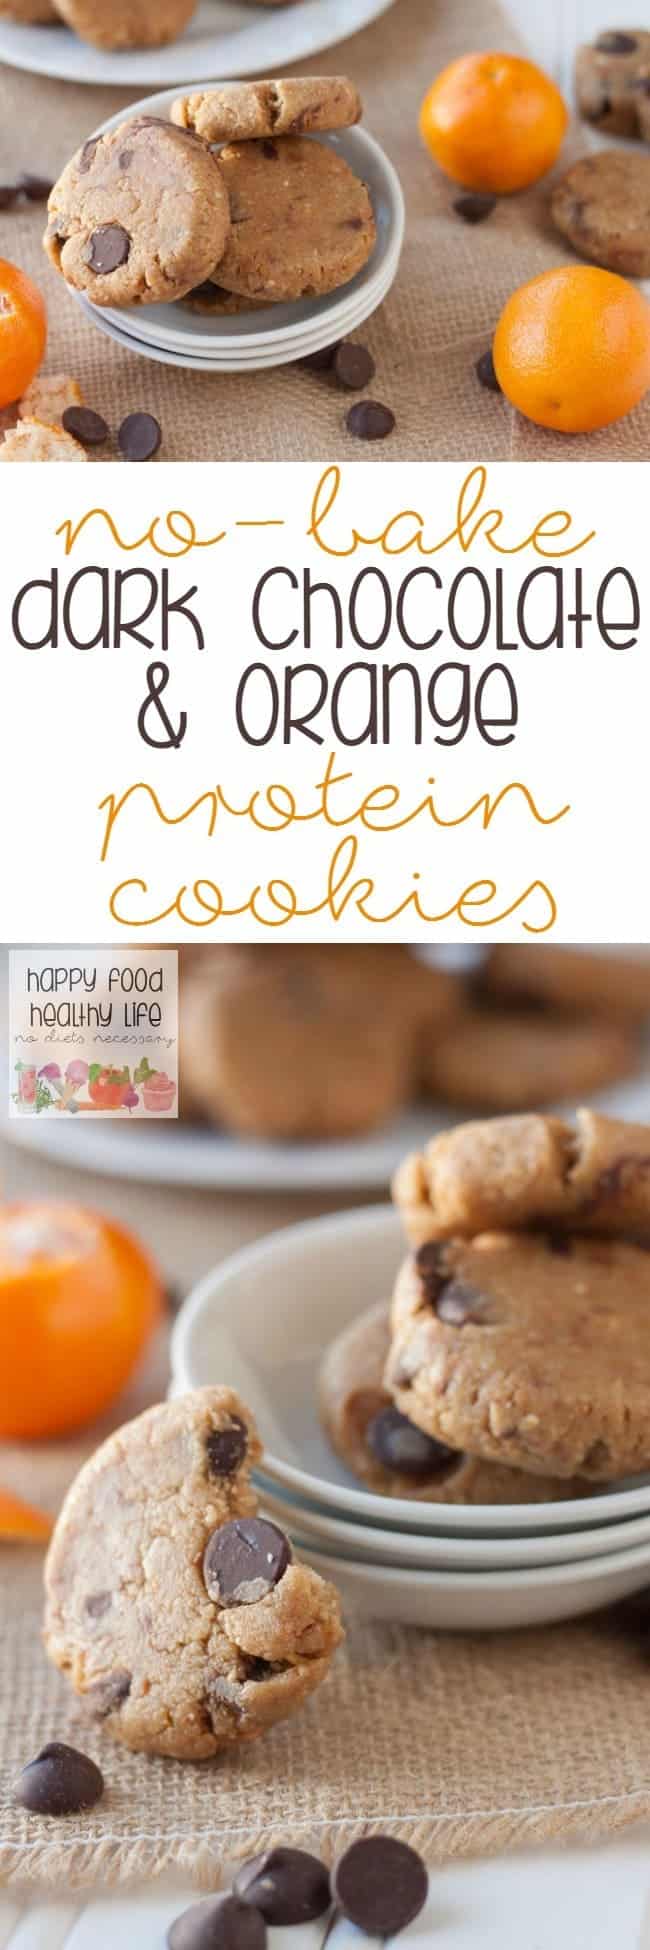 No-Bake Dark Chocolate Orange Protein Cookies - a healthy cookie that you can eat for breakfast? AND you don't even have to bake it, so it's ready in no time at all!